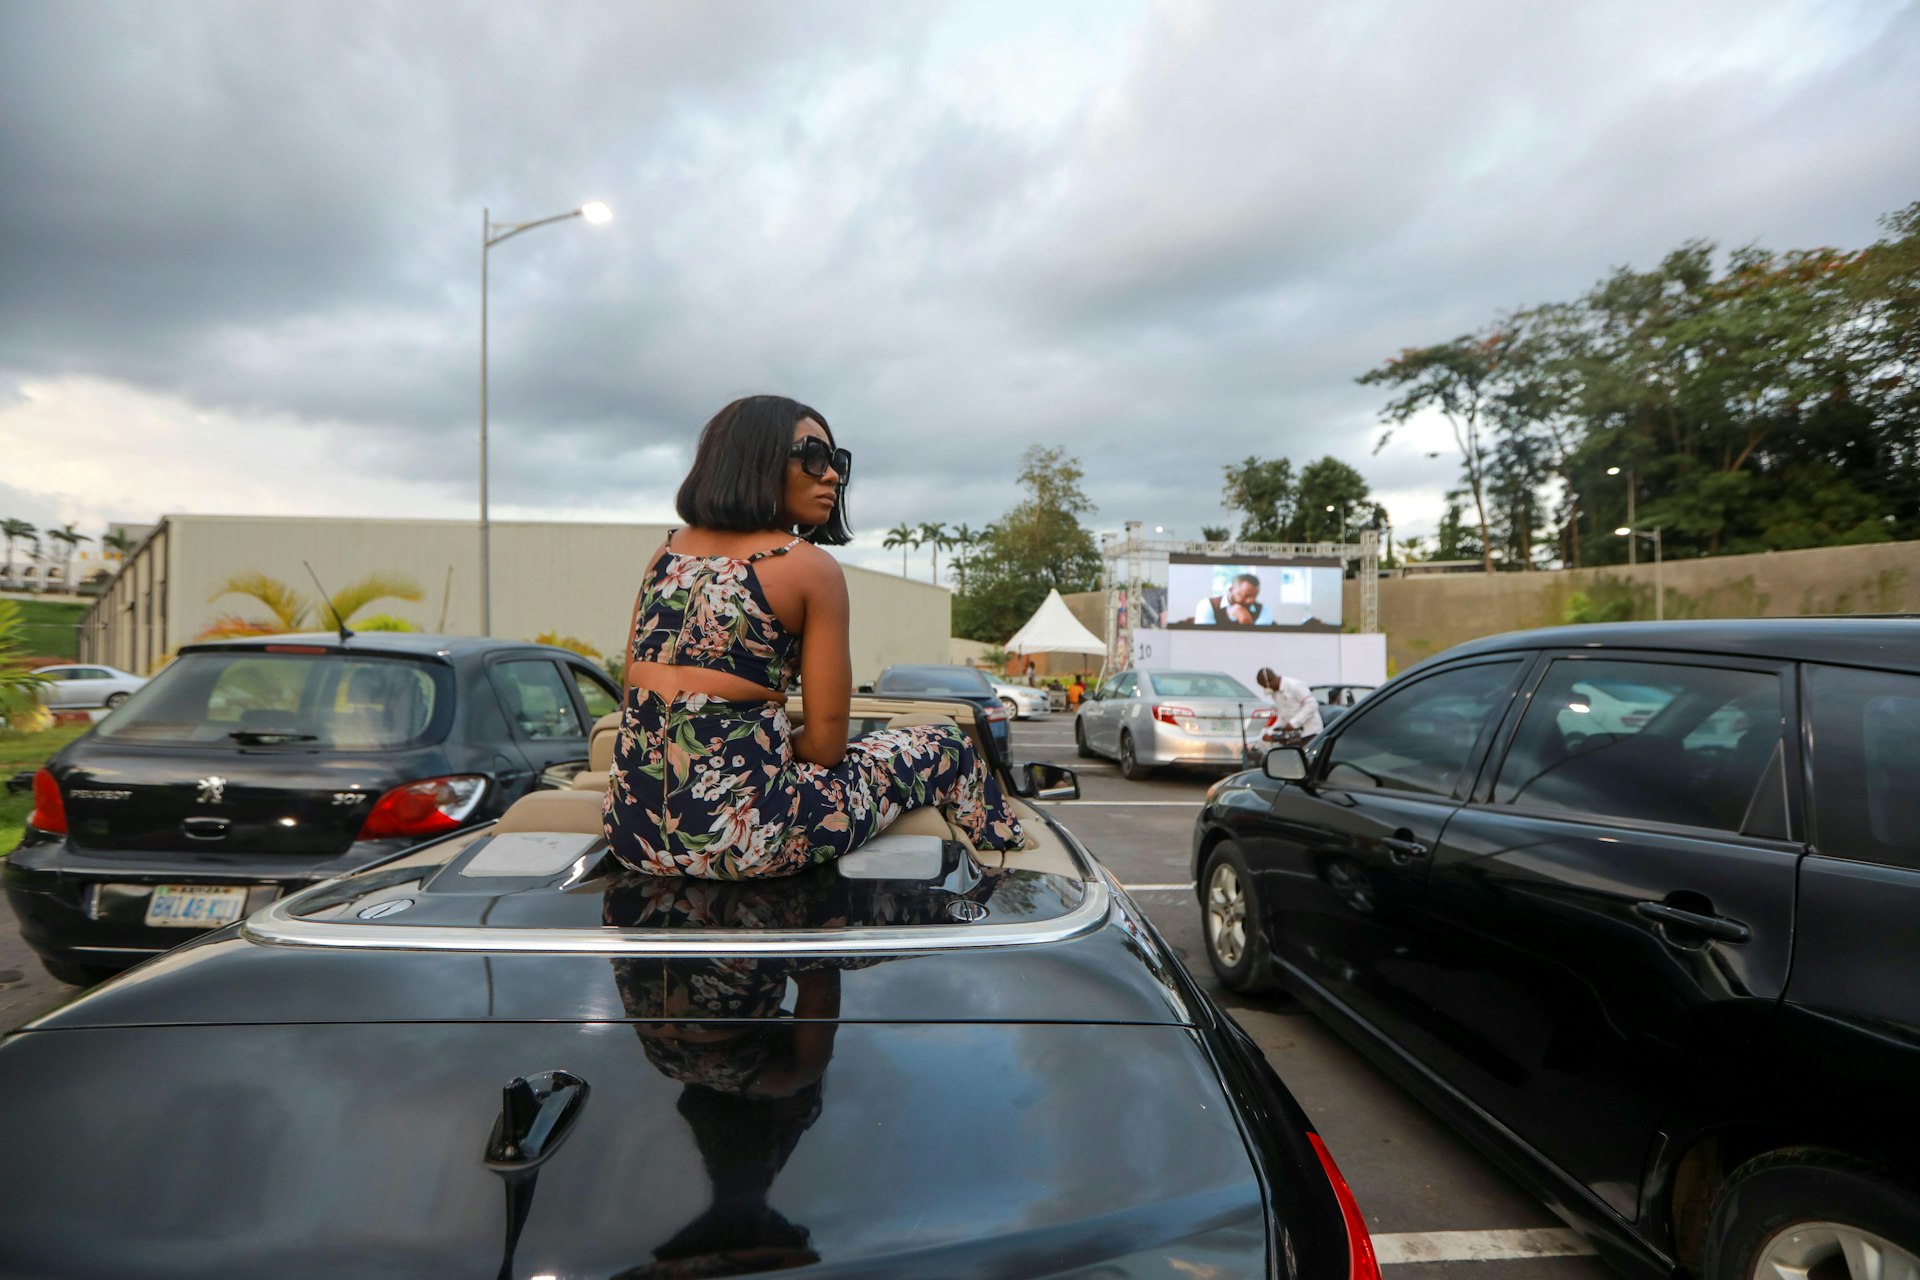 A woman sits on a car to watch Living in bondage movie at a drive-in cinema, following the relaxation of lockdown, amid the coronavirus disease (COVID-19) outbreak in Abuja, Nigeria May 20, 2020. Picture taken May 20, 2020. REUTERS/Afolabi Sotunde